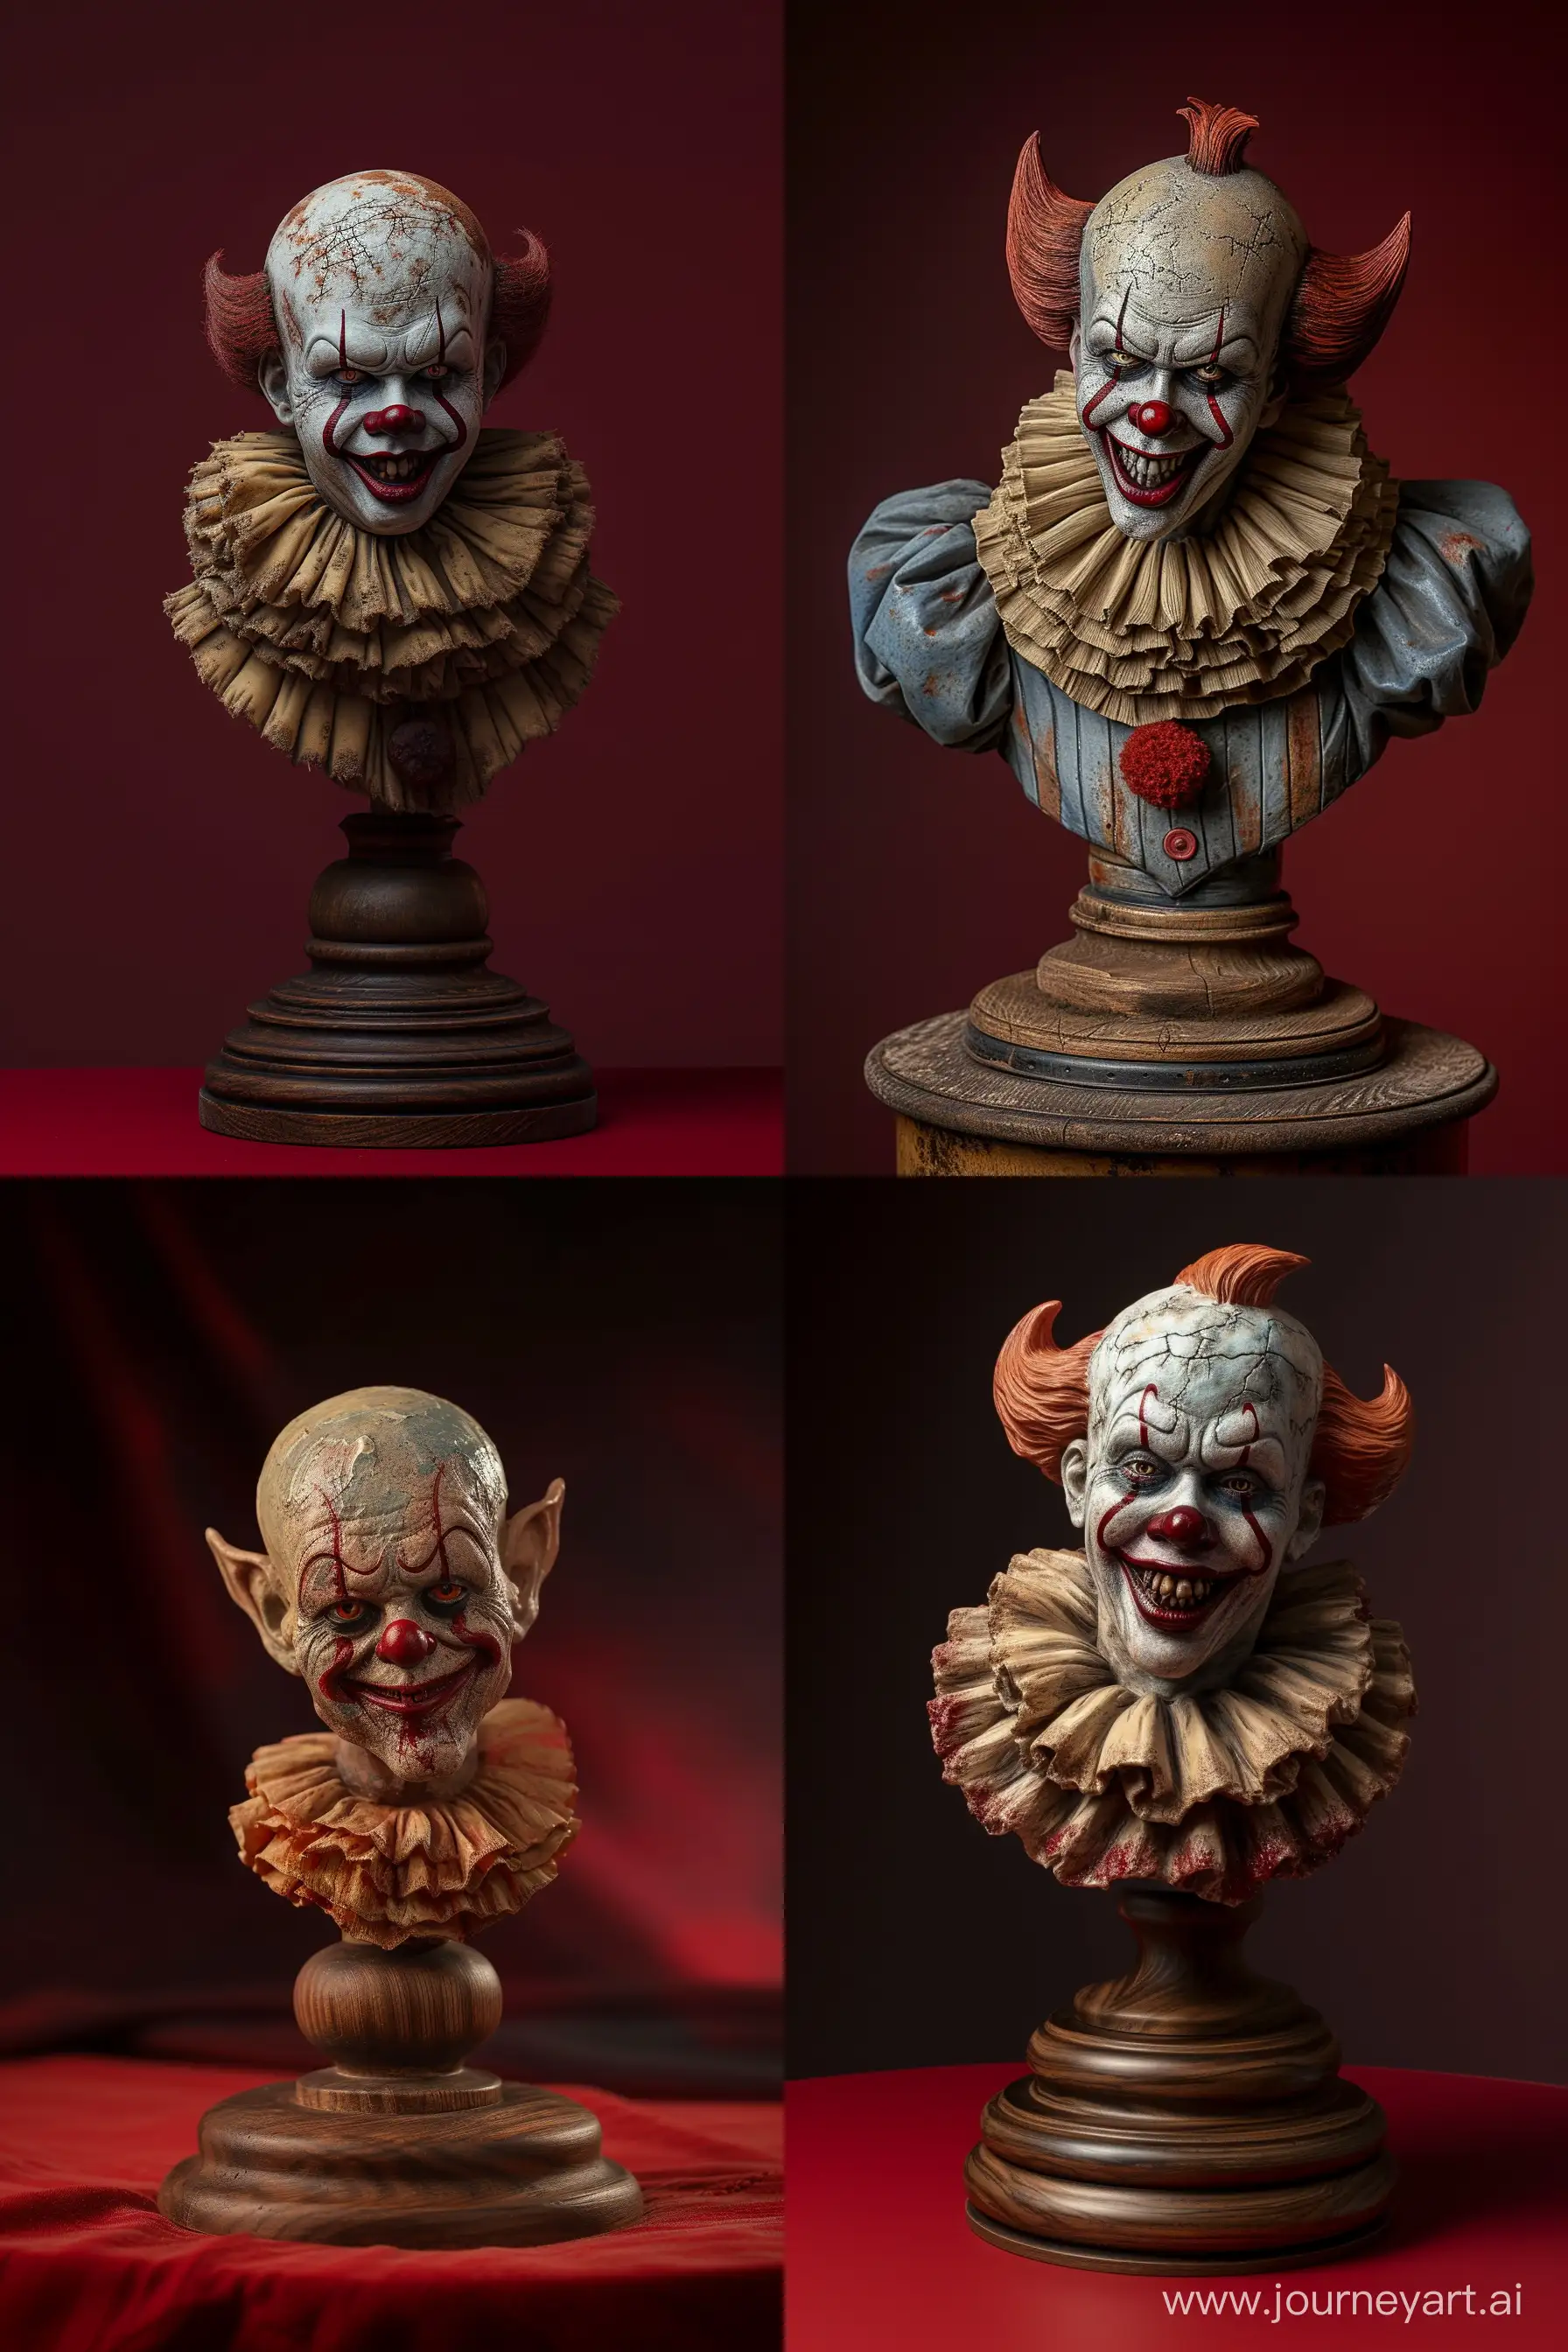 Cinematic-Clown-Sculpture-on-Wooden-Base-with-Blistered-Texture-and-Dark-Red-Background